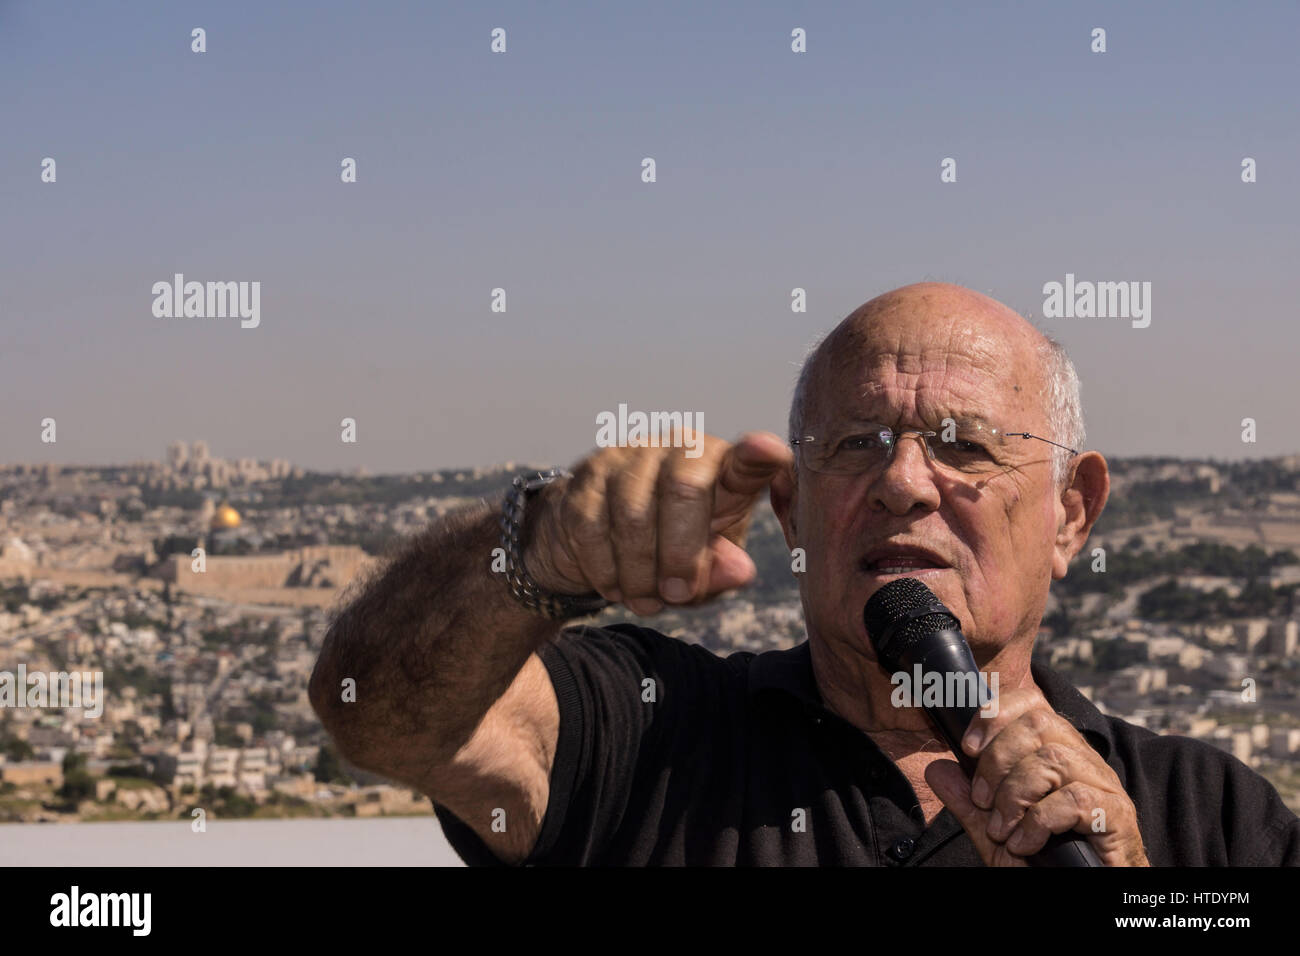 Yossi Langotzki, a former officer and a Geologist responsible for finding offshore natural gas reserves in Israel, speaks. Temple mount in background. Stock Photo